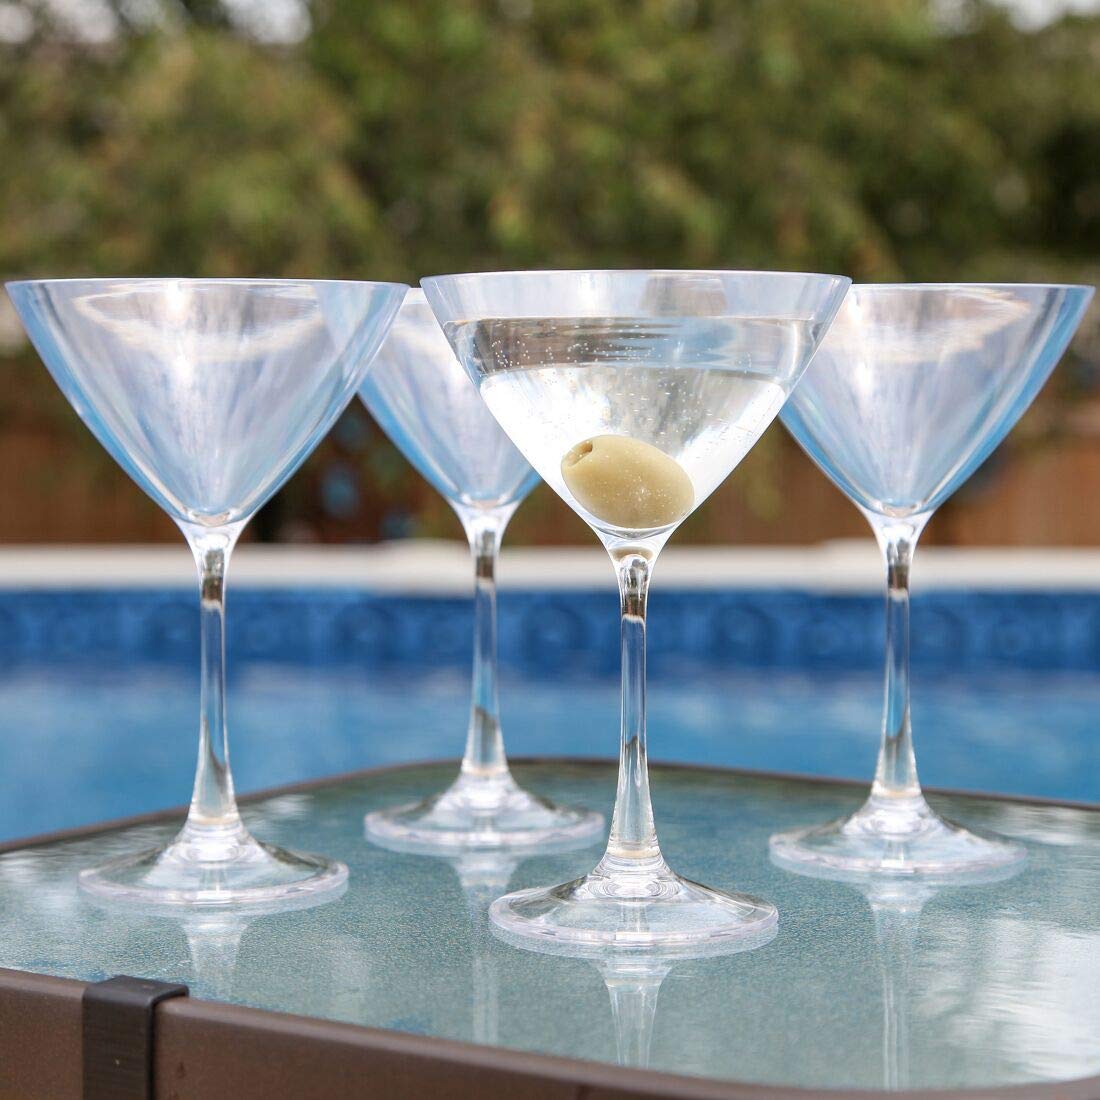 Lily's Home Unbreakable Acrylic Martini Glasses, Made of Shatterproof Plastic and Ideal for Indoor and Outdoor Use, Reusable, Crystal Clear (8.5 oz. Each, Set of 4)